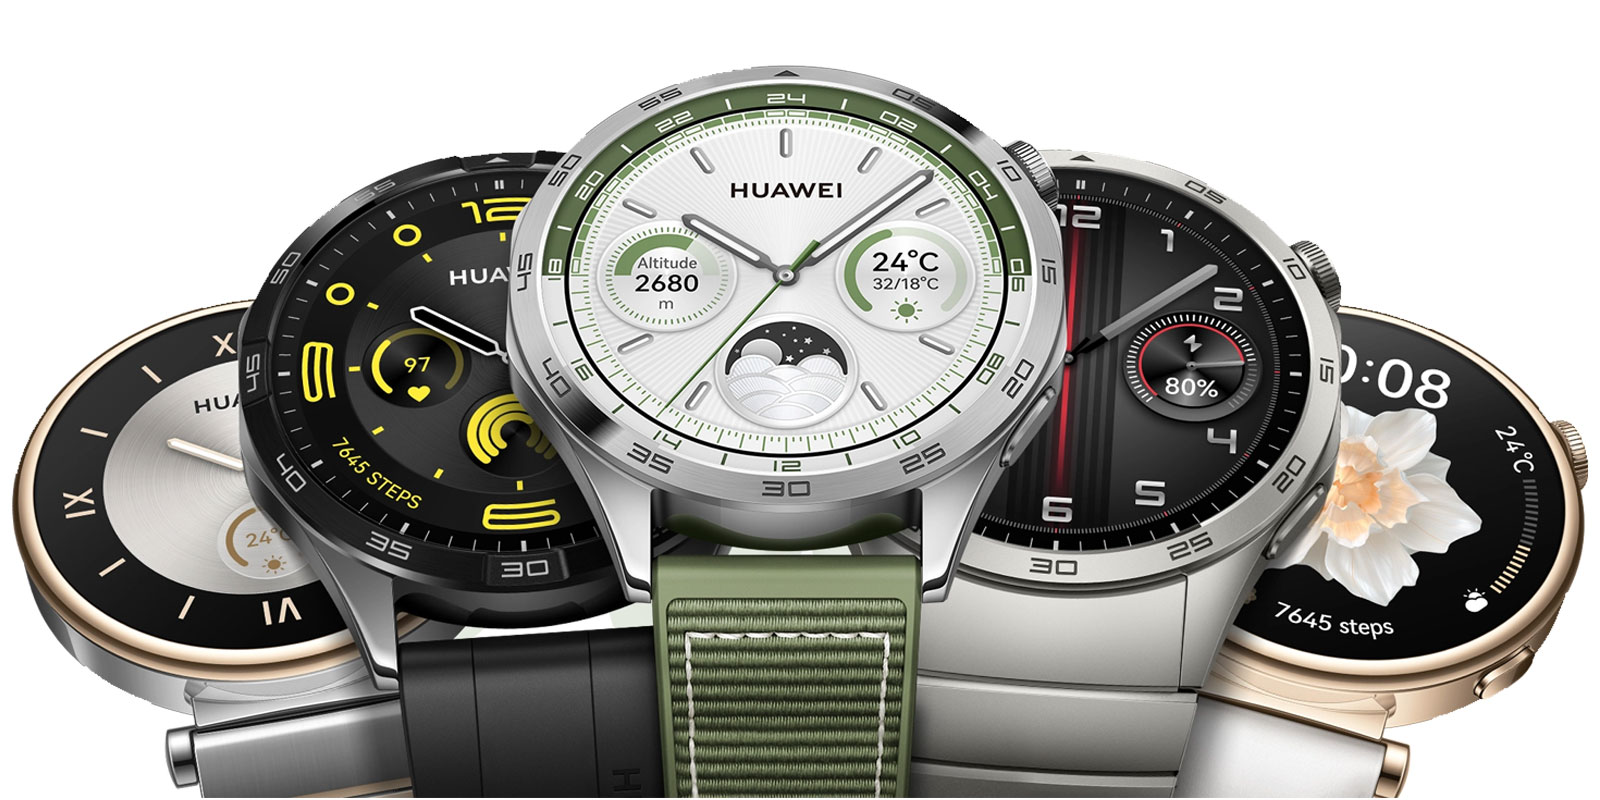 Huawei Watch GT 3 has improved fitness tracking, 14-day battery life |  Mashable